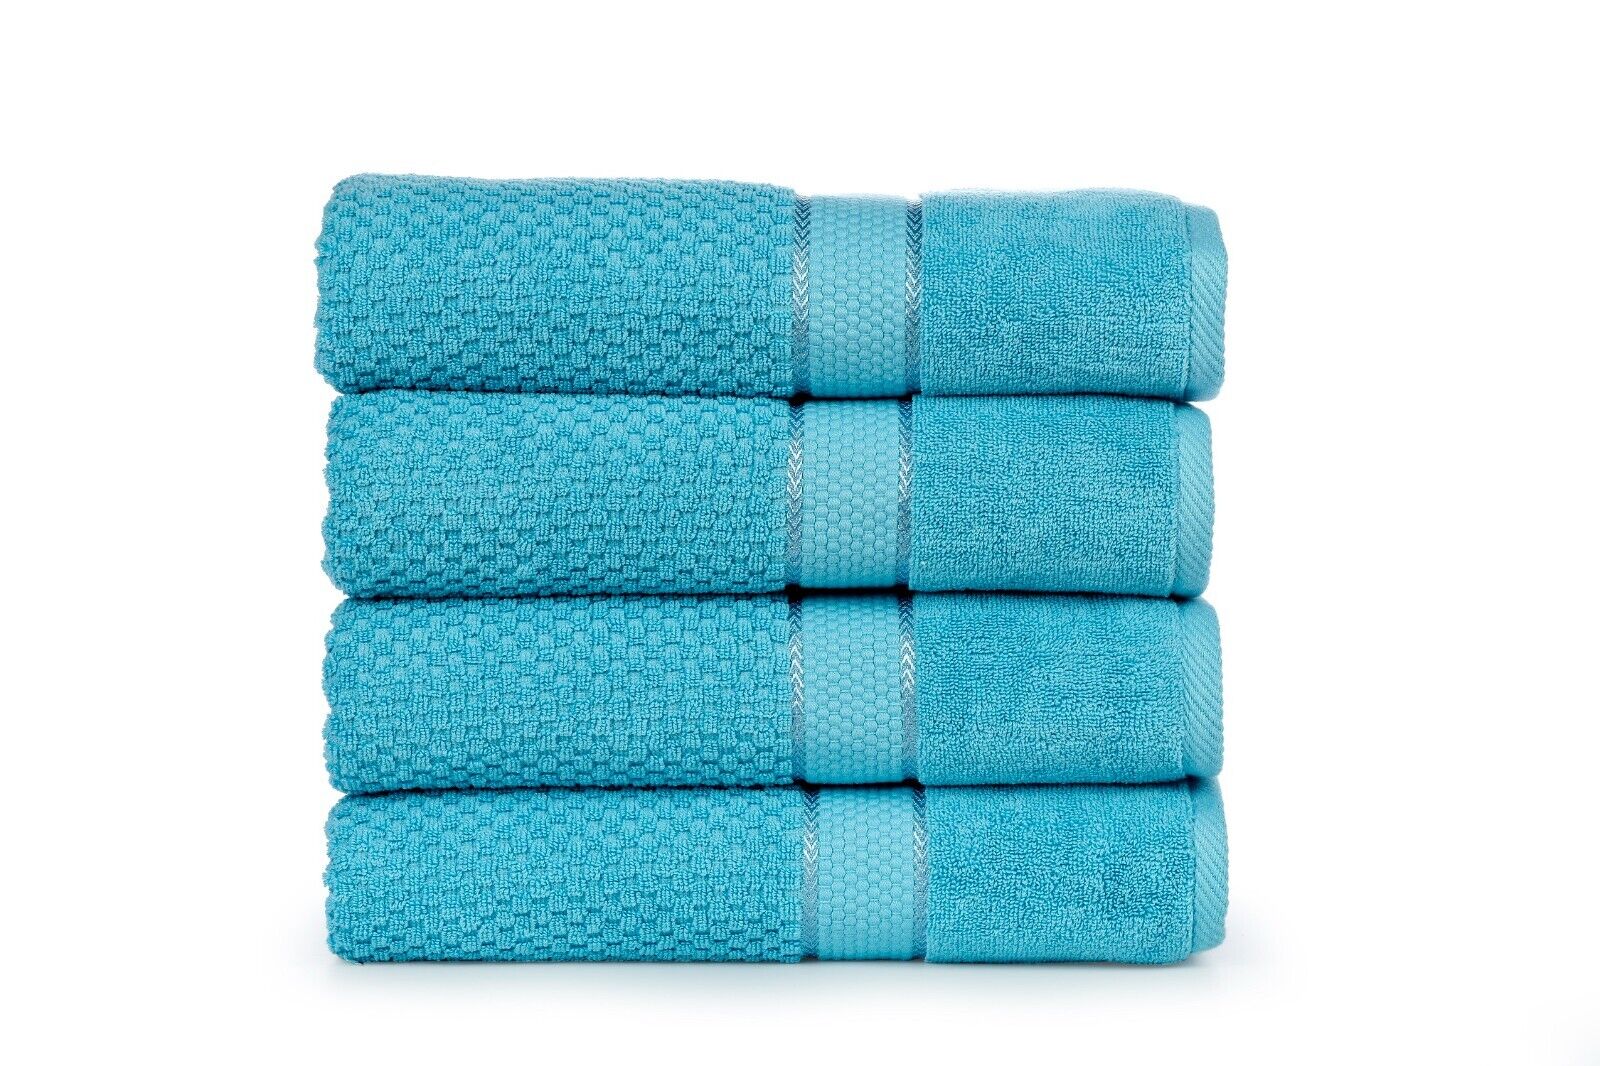 Ample Decor Set of 4 Hand Towel 100% Cotton - Highly Absorbent, Popcorn Textured